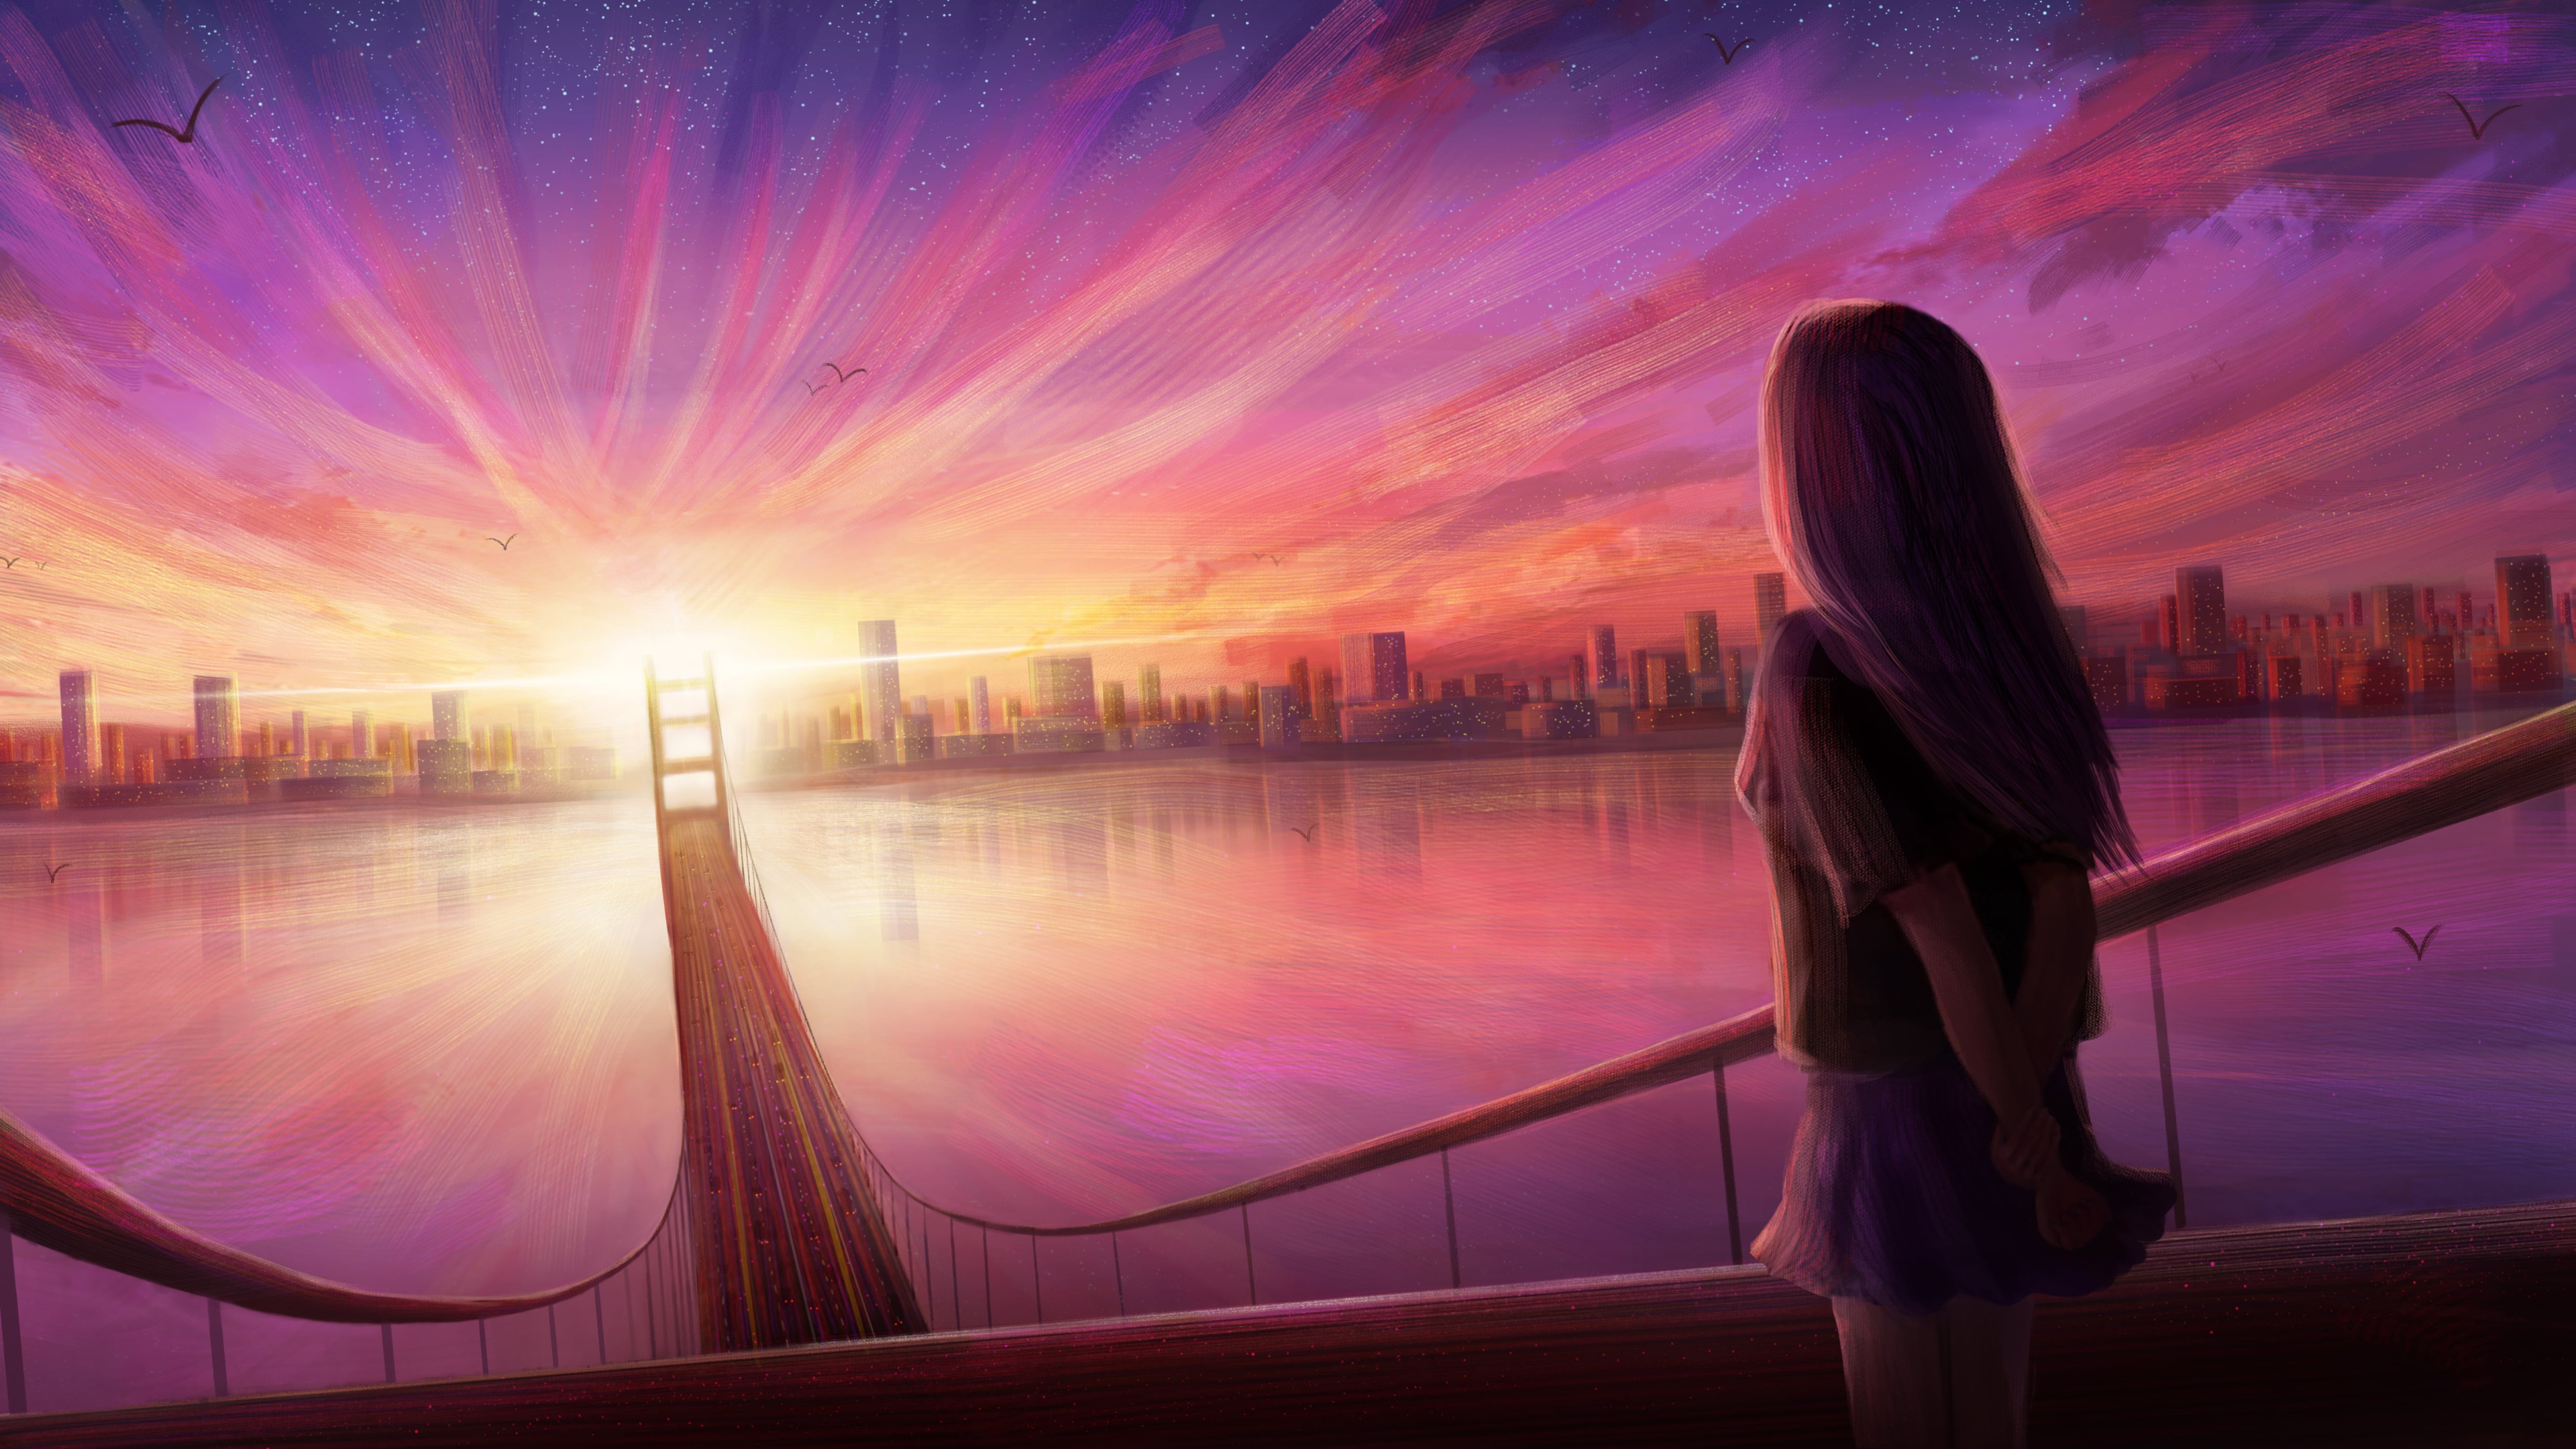 Sunset Anime Wallpaper : Cityscape 2564 Backiee 4kwallpapers | Driskulin